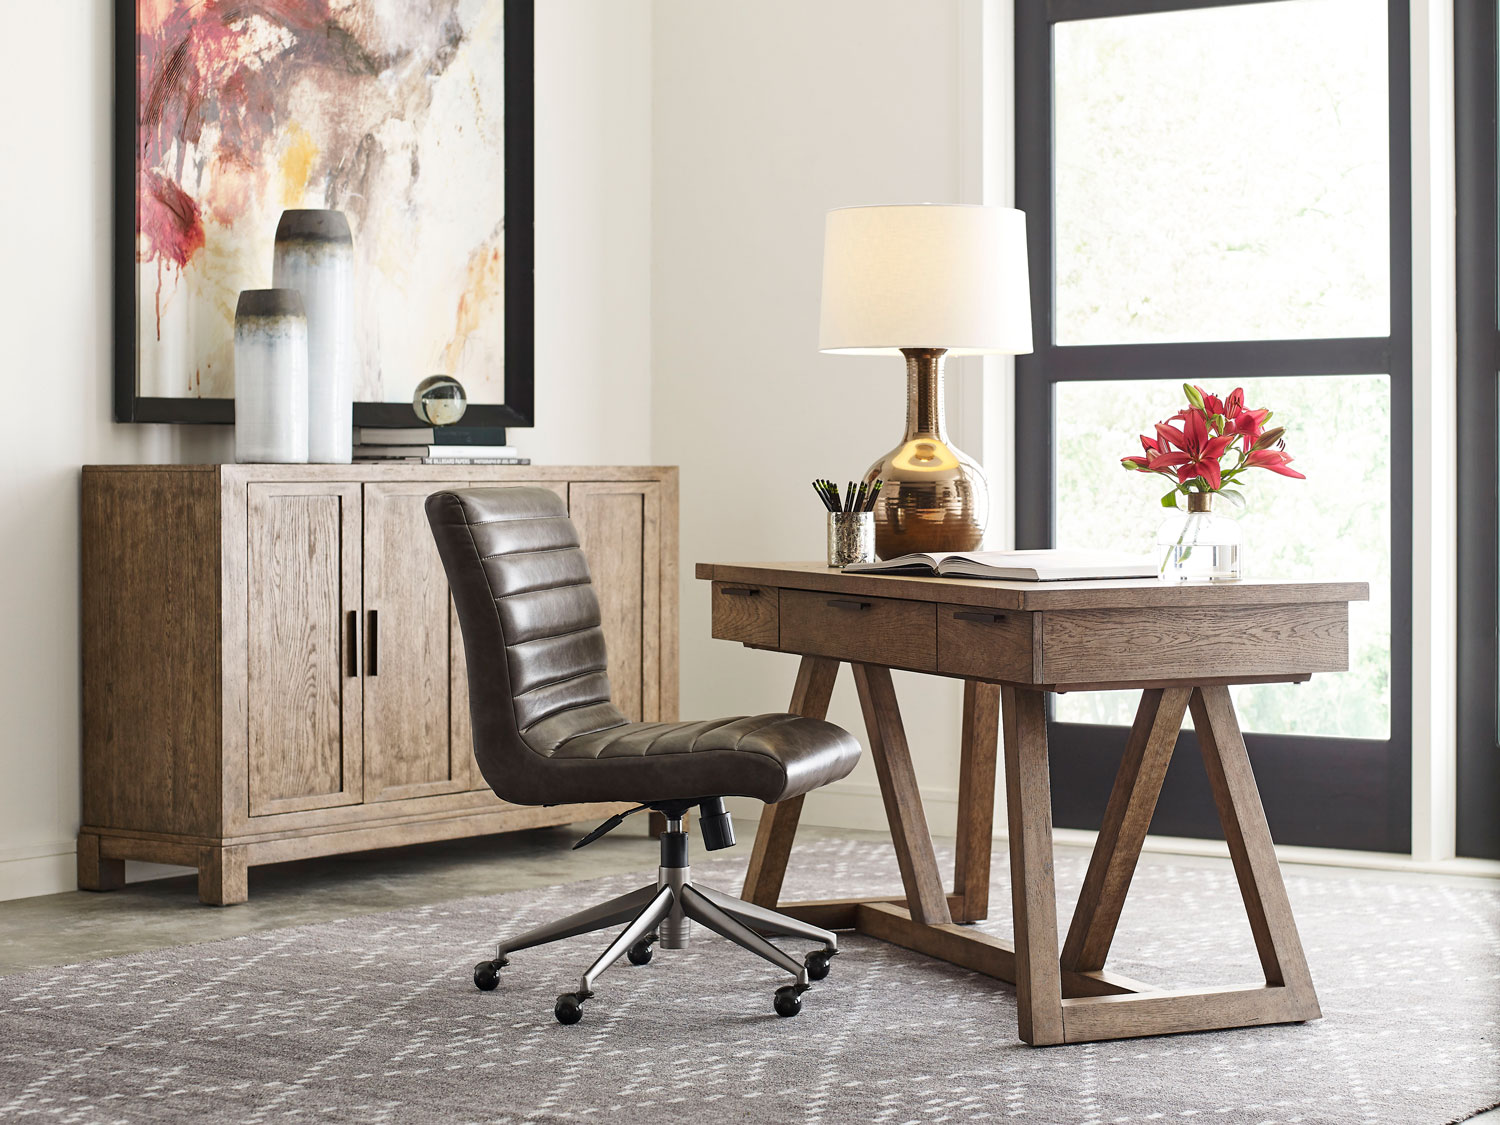 Decorate with leather office chairs. A photo of a sleek, leather office chair next to a modern wood office desk. 